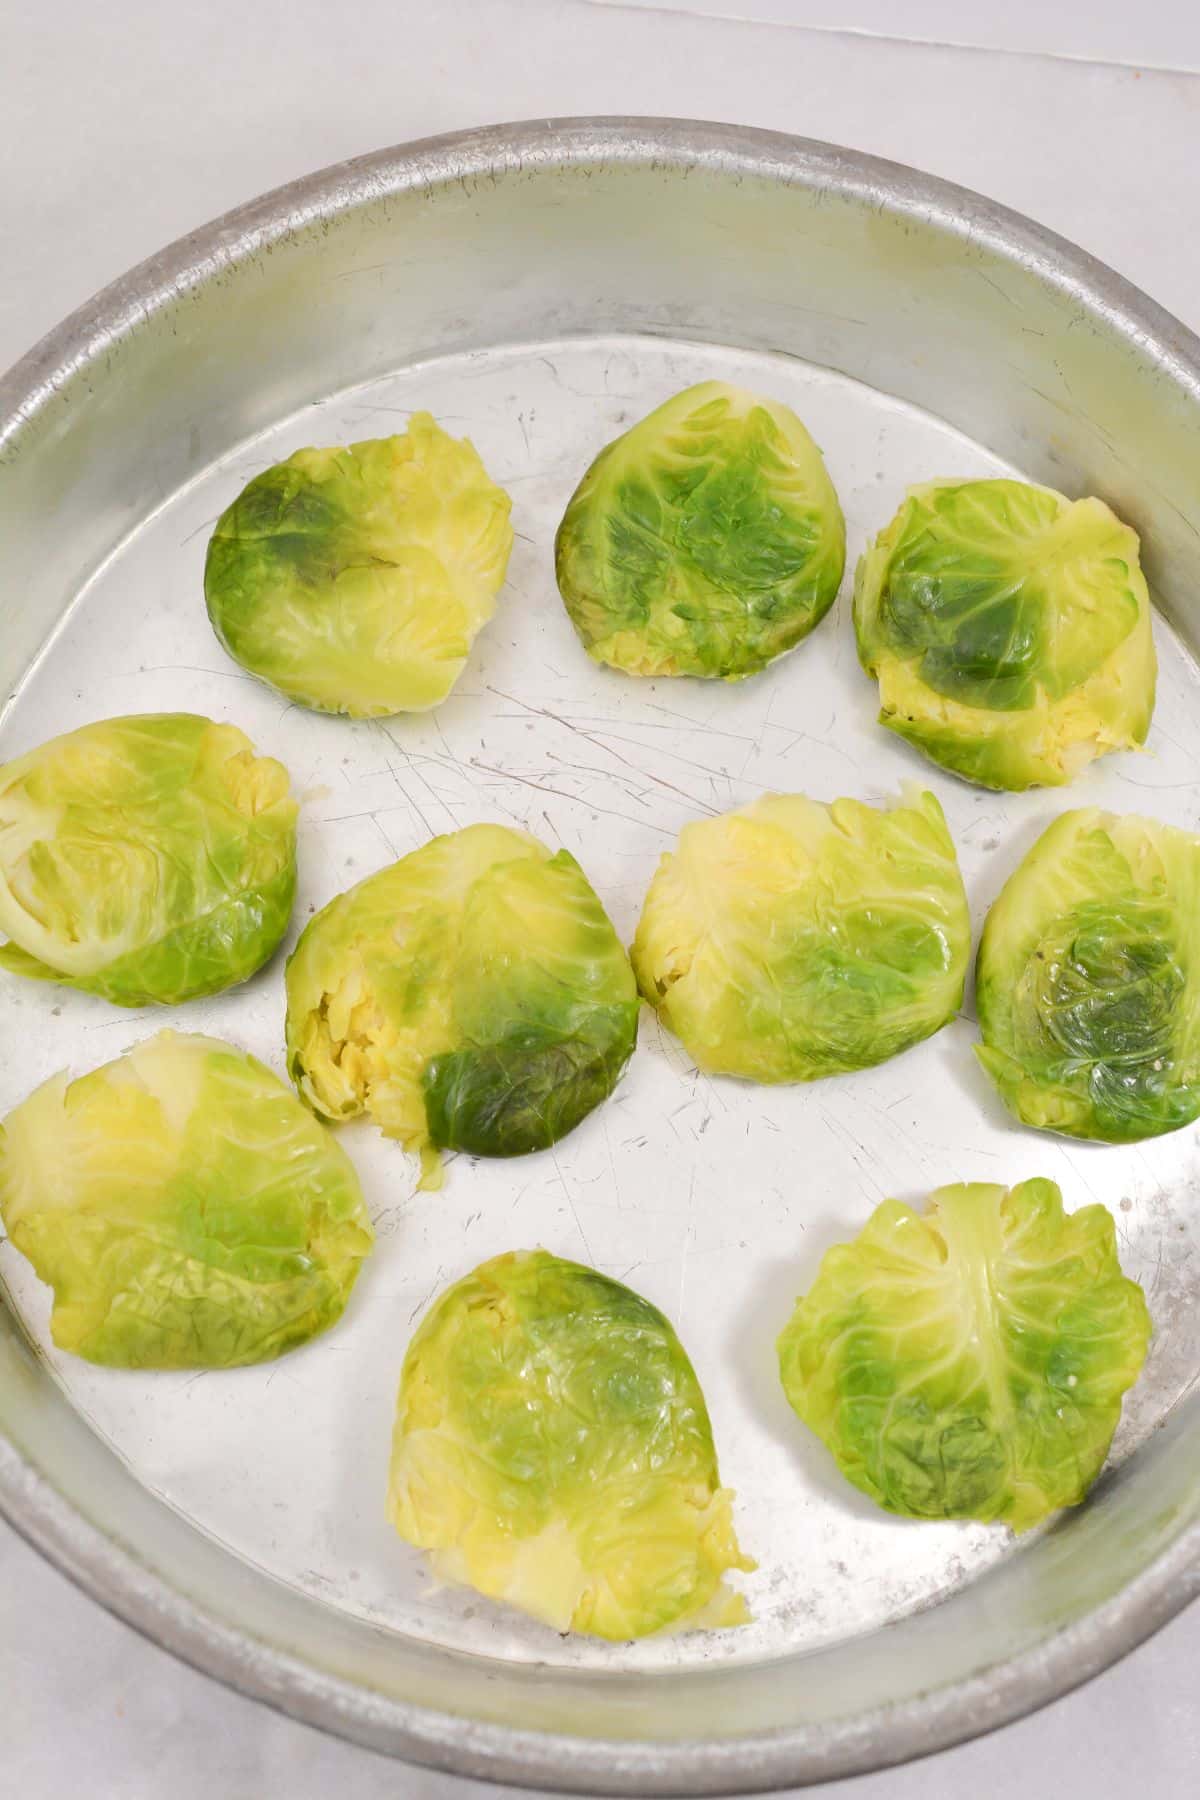 Drained brussels sprouts in a pan